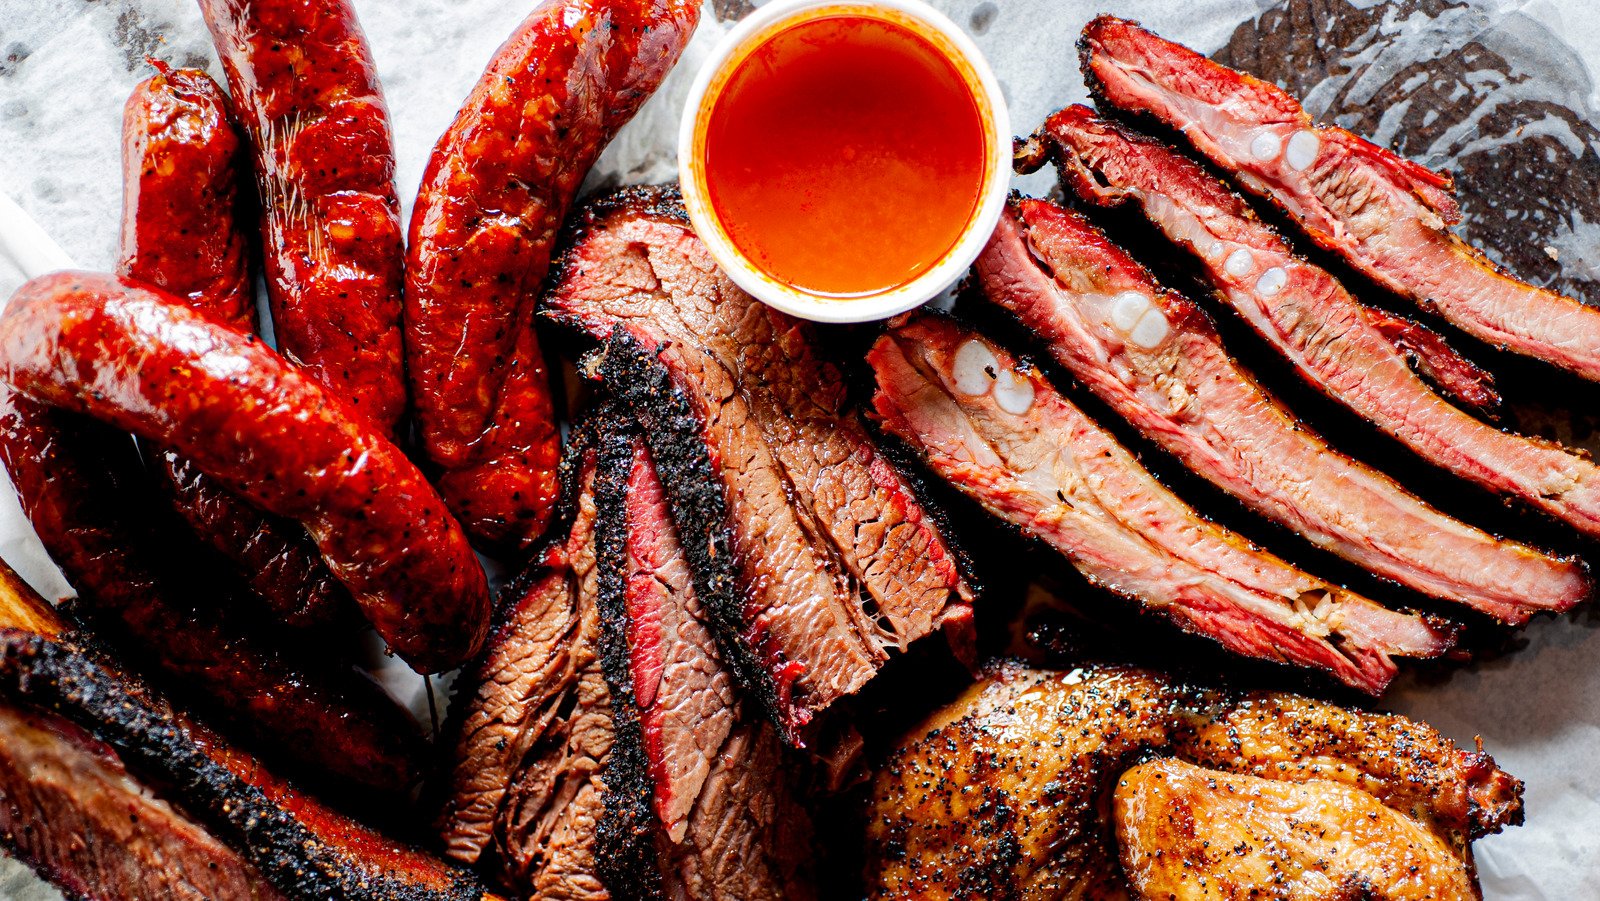 The Absolute Best BBQ Restaurants In The US